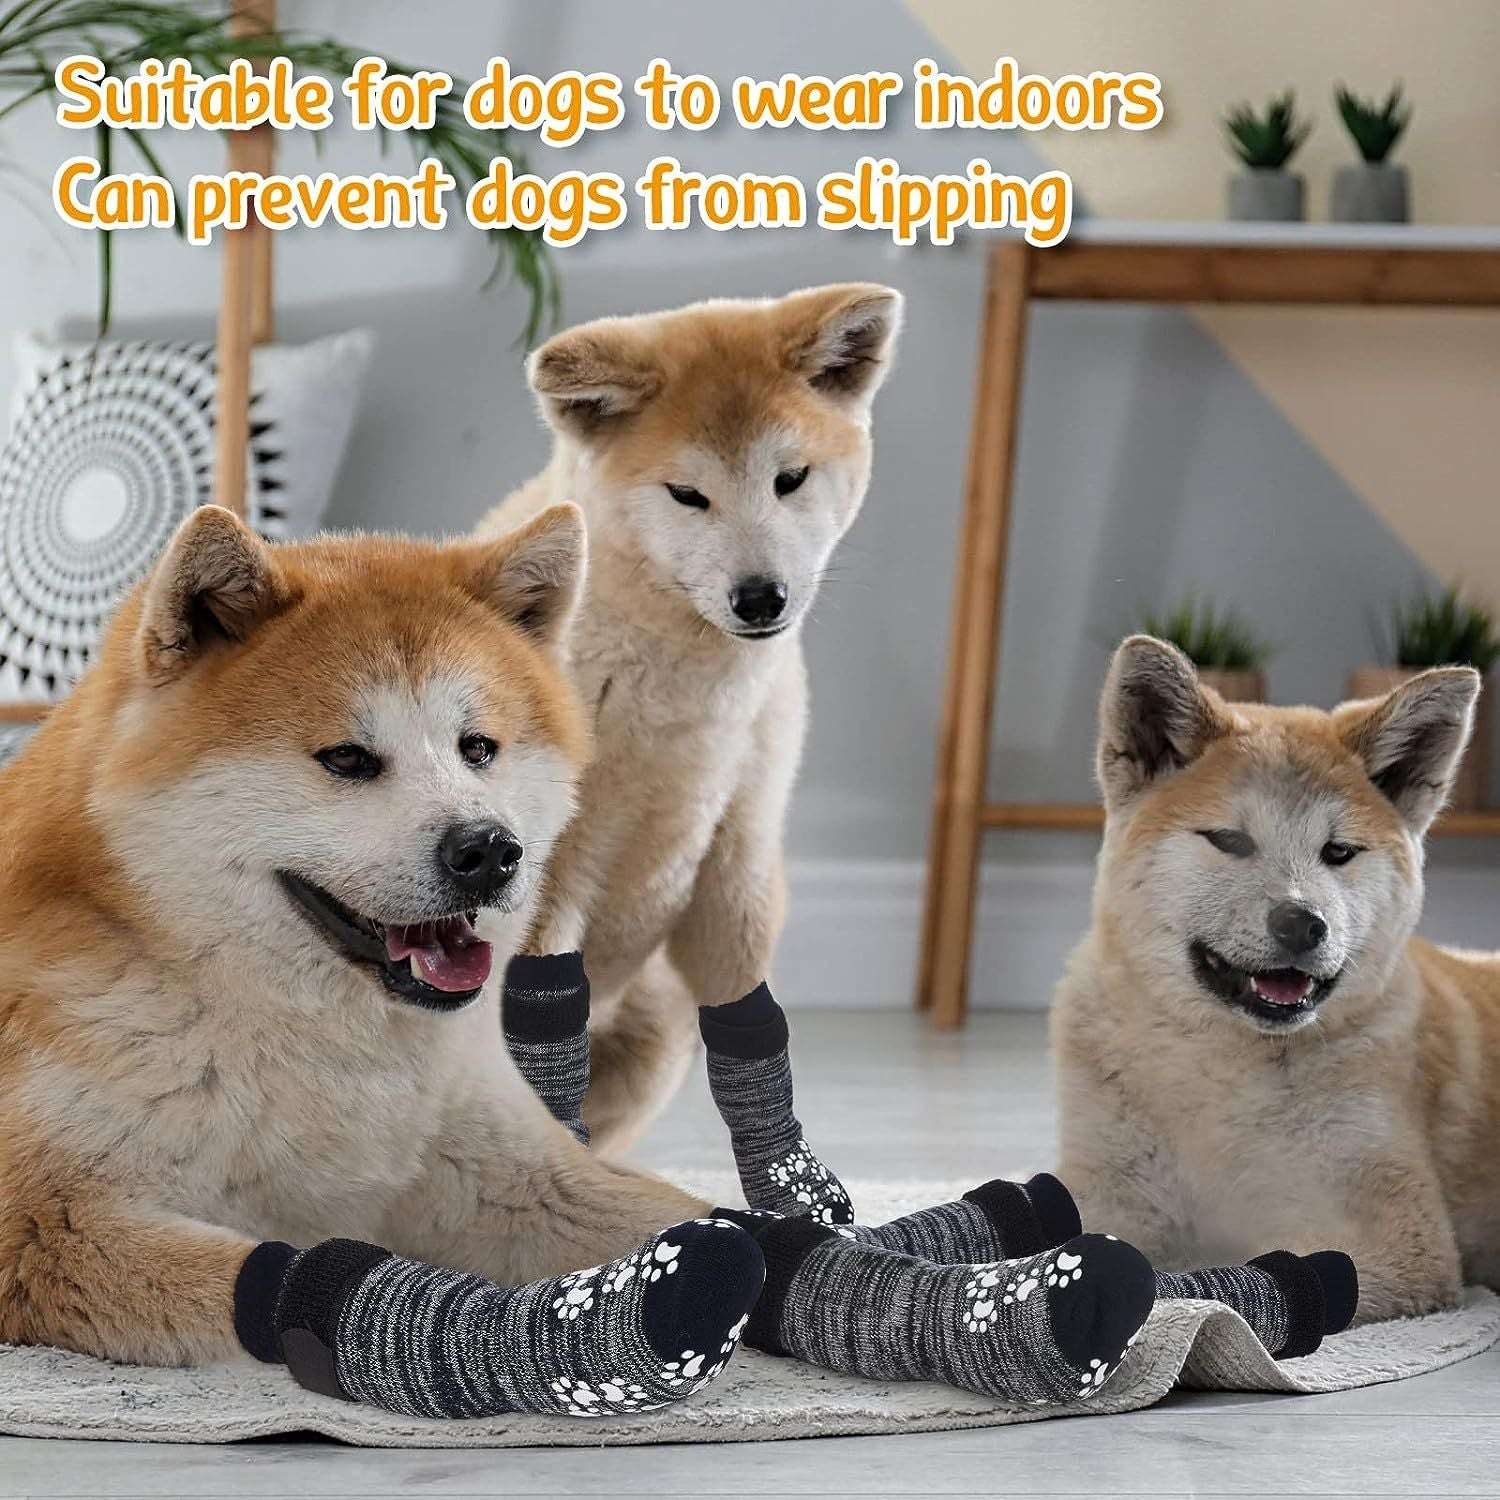 KUTKUT 8Pcs Double Side Anti-Slip Dog Socks with Adjustable Straps - Warm Strong Traction Control for Indoor on Hardwood Floor Wear Soft and Comfortable Paw Protector for Medium Large Dogs - 